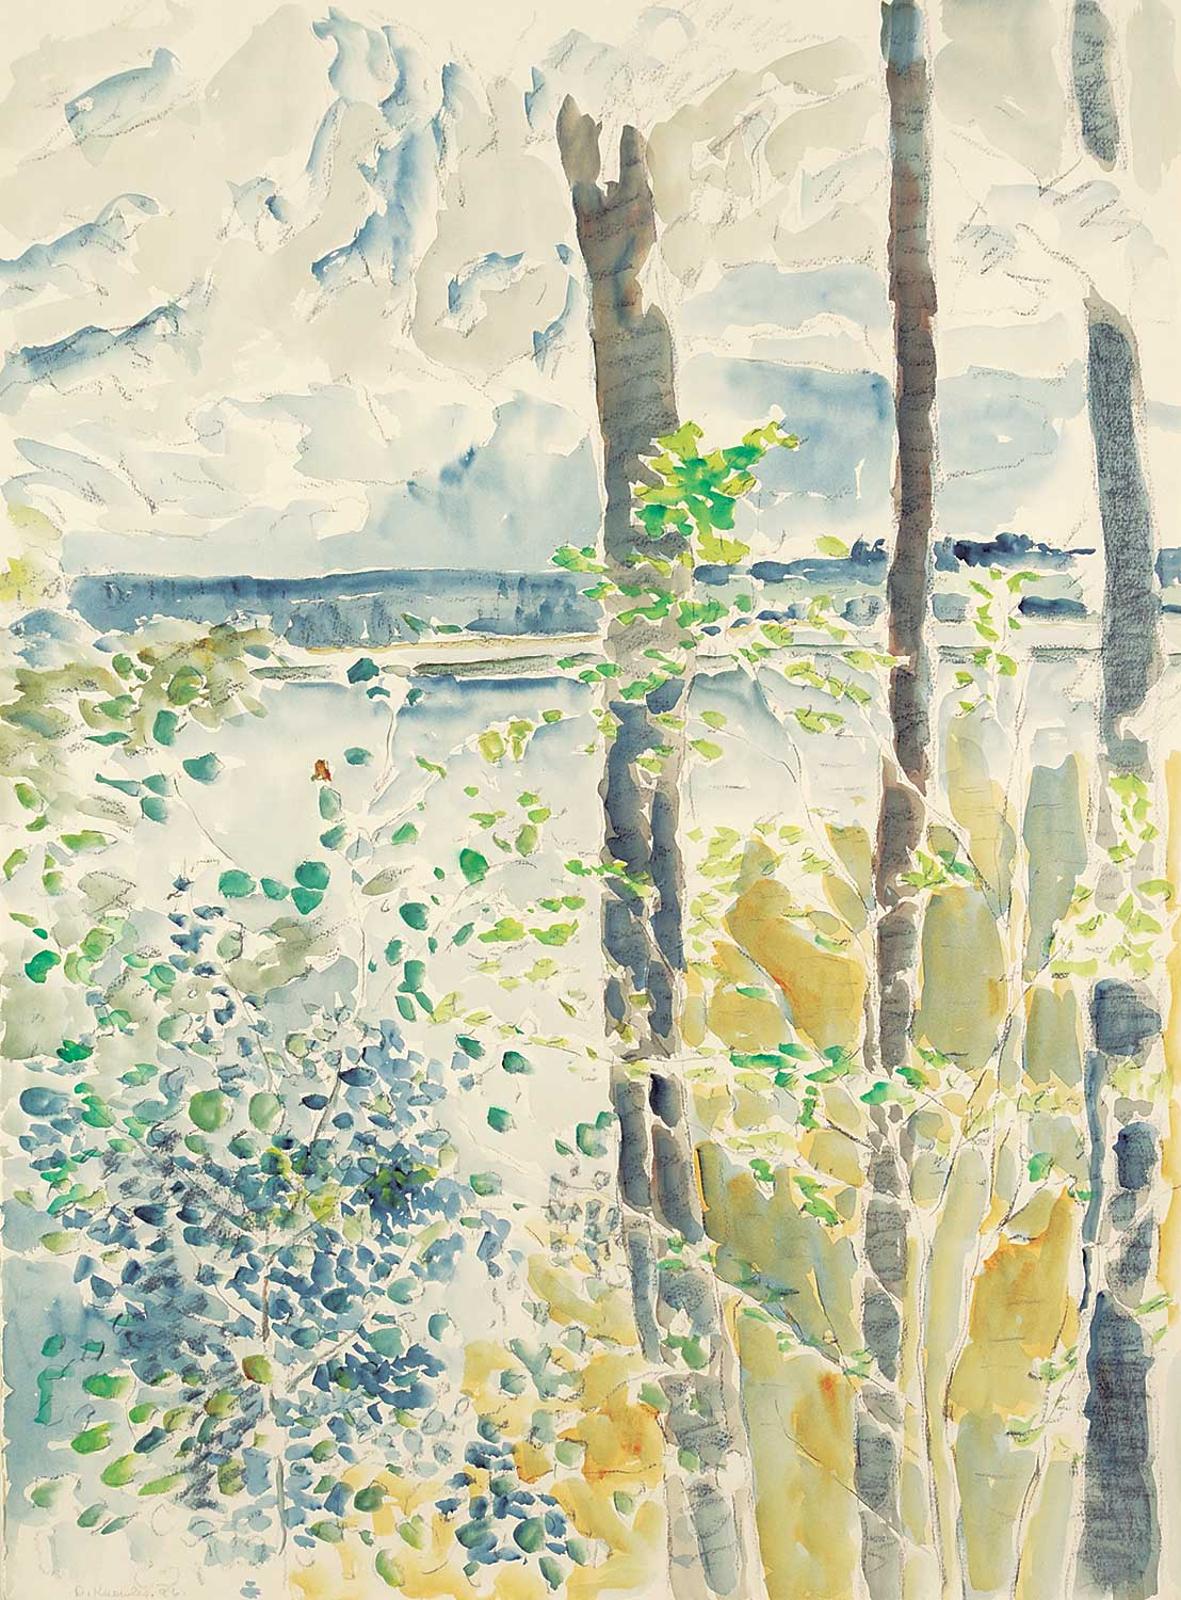 Dorothy Elsie Knowles (1927-2001) - Untitled - View from the Lake